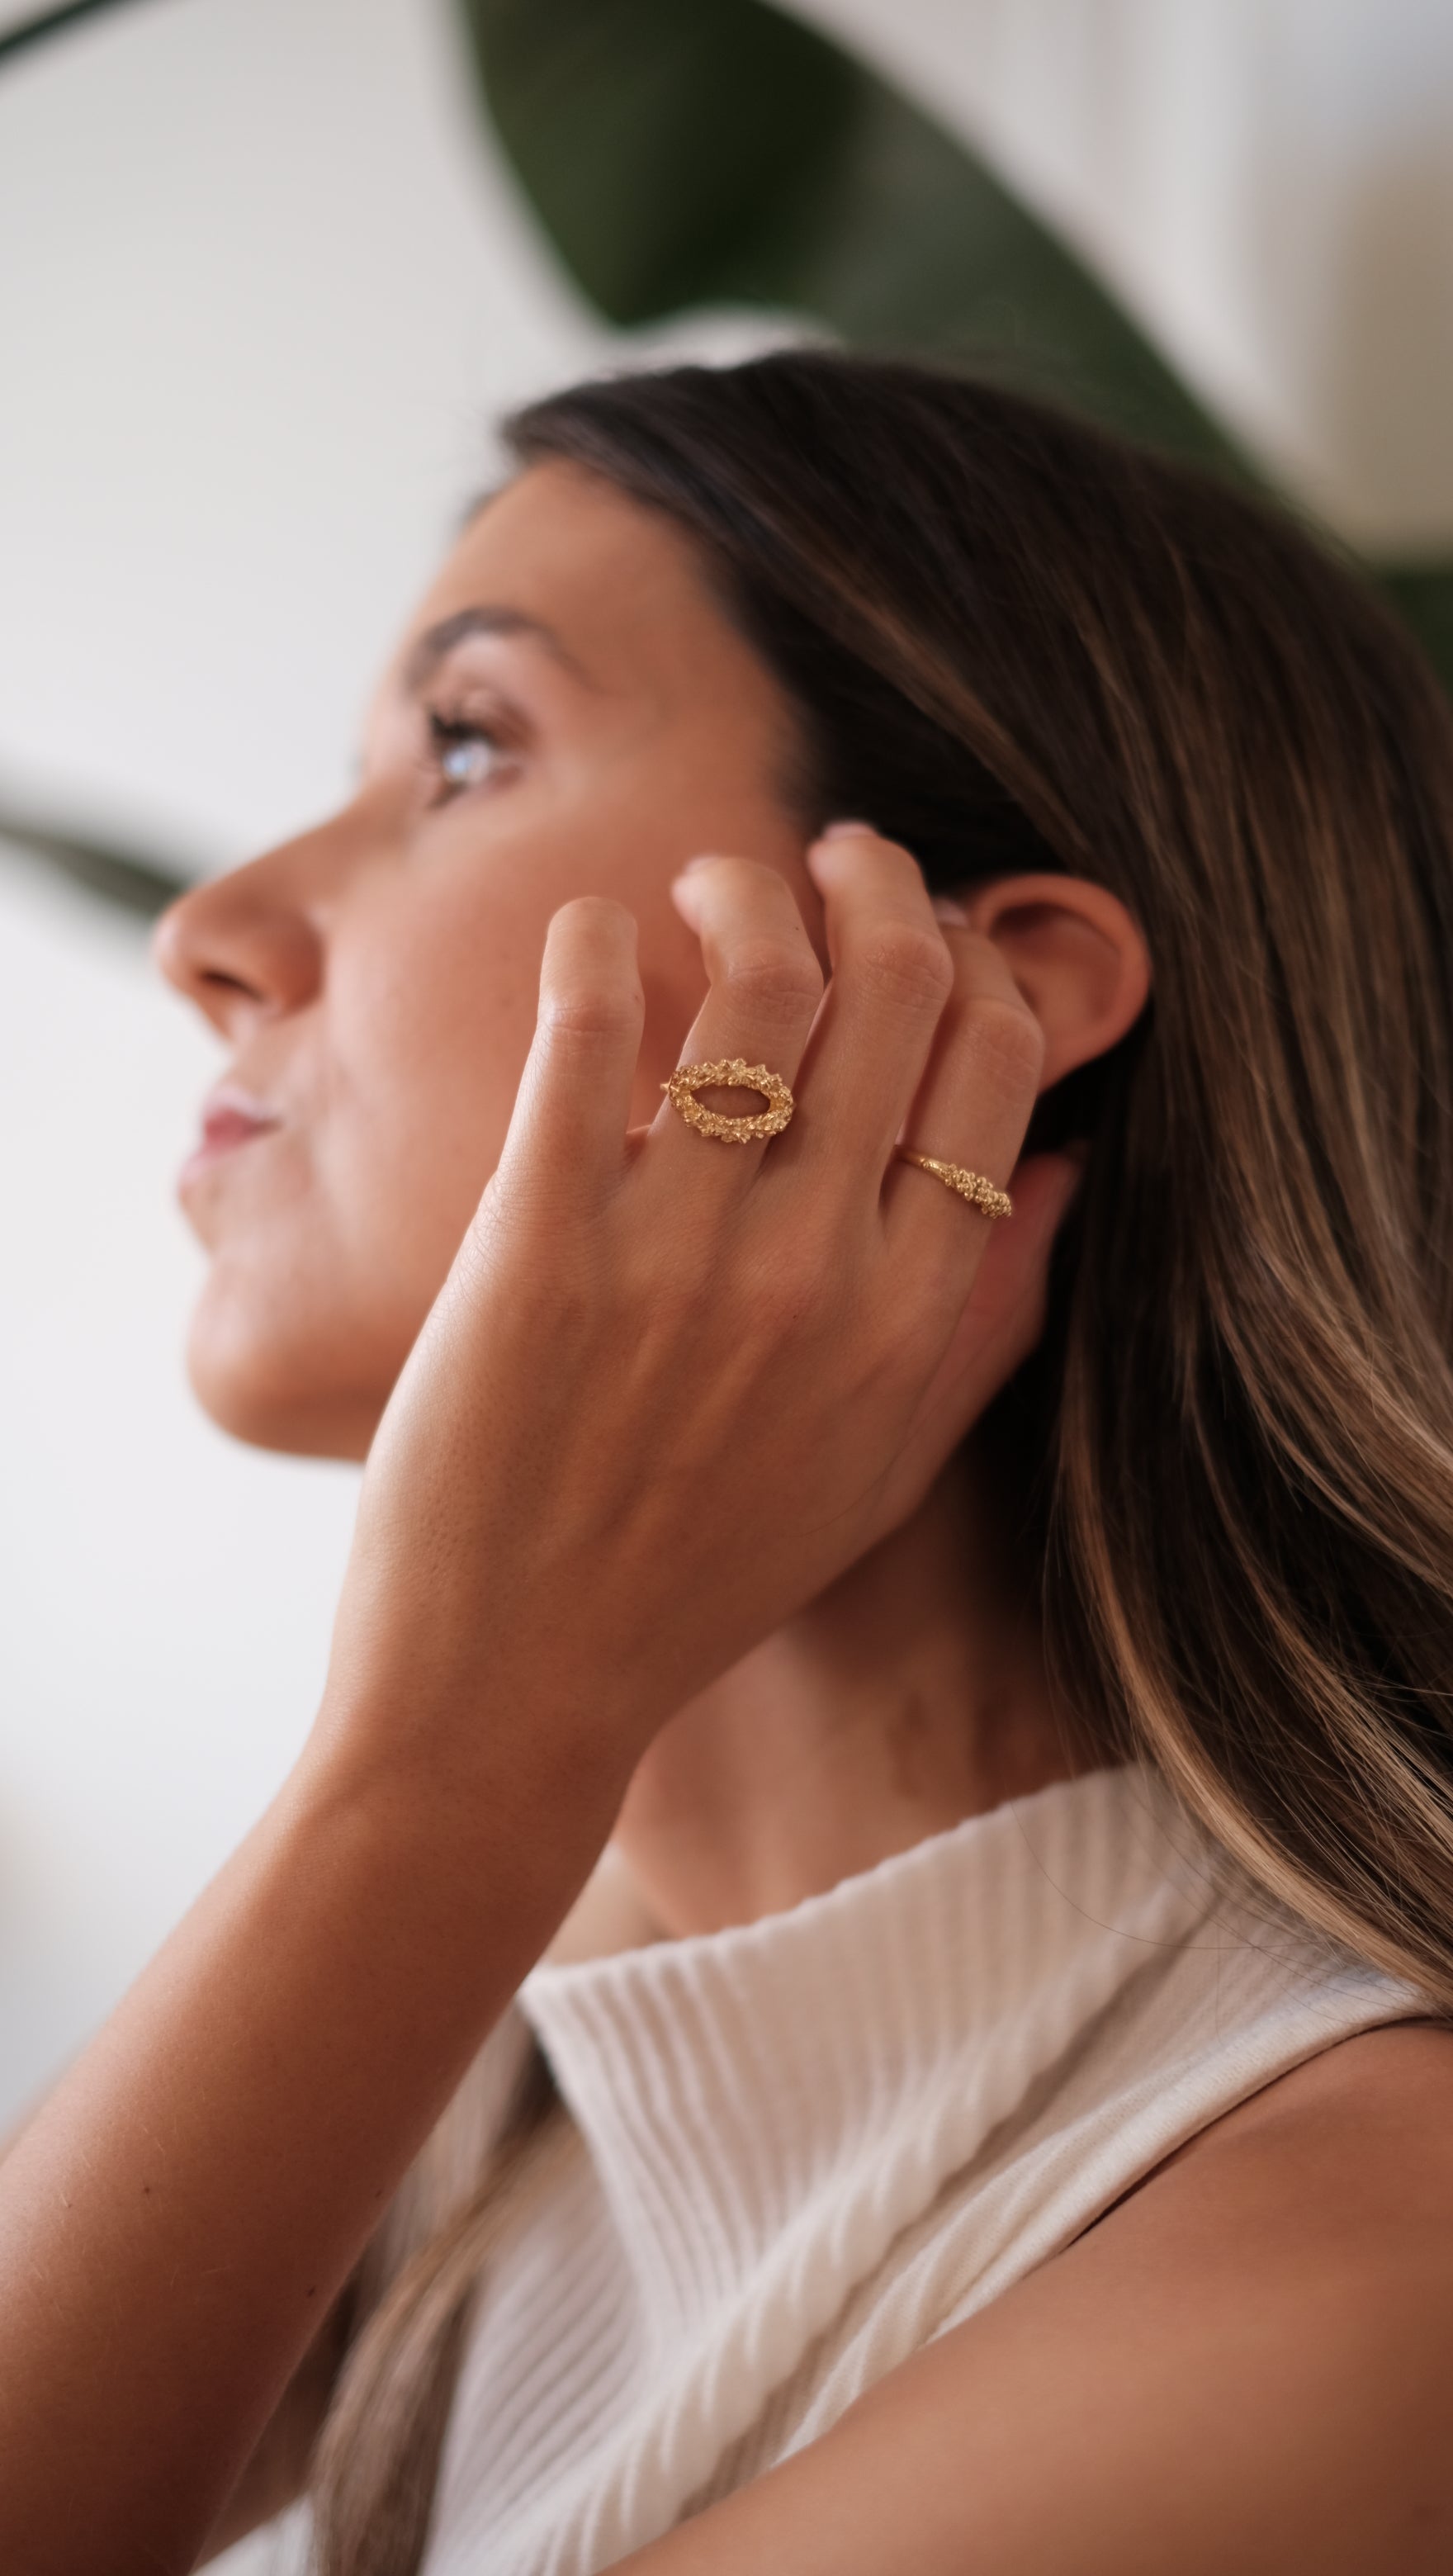 A woman showcasing the 18K Yellow GOLD Essential Dot Ring from her Cremilde Bispo Jewellery collection.